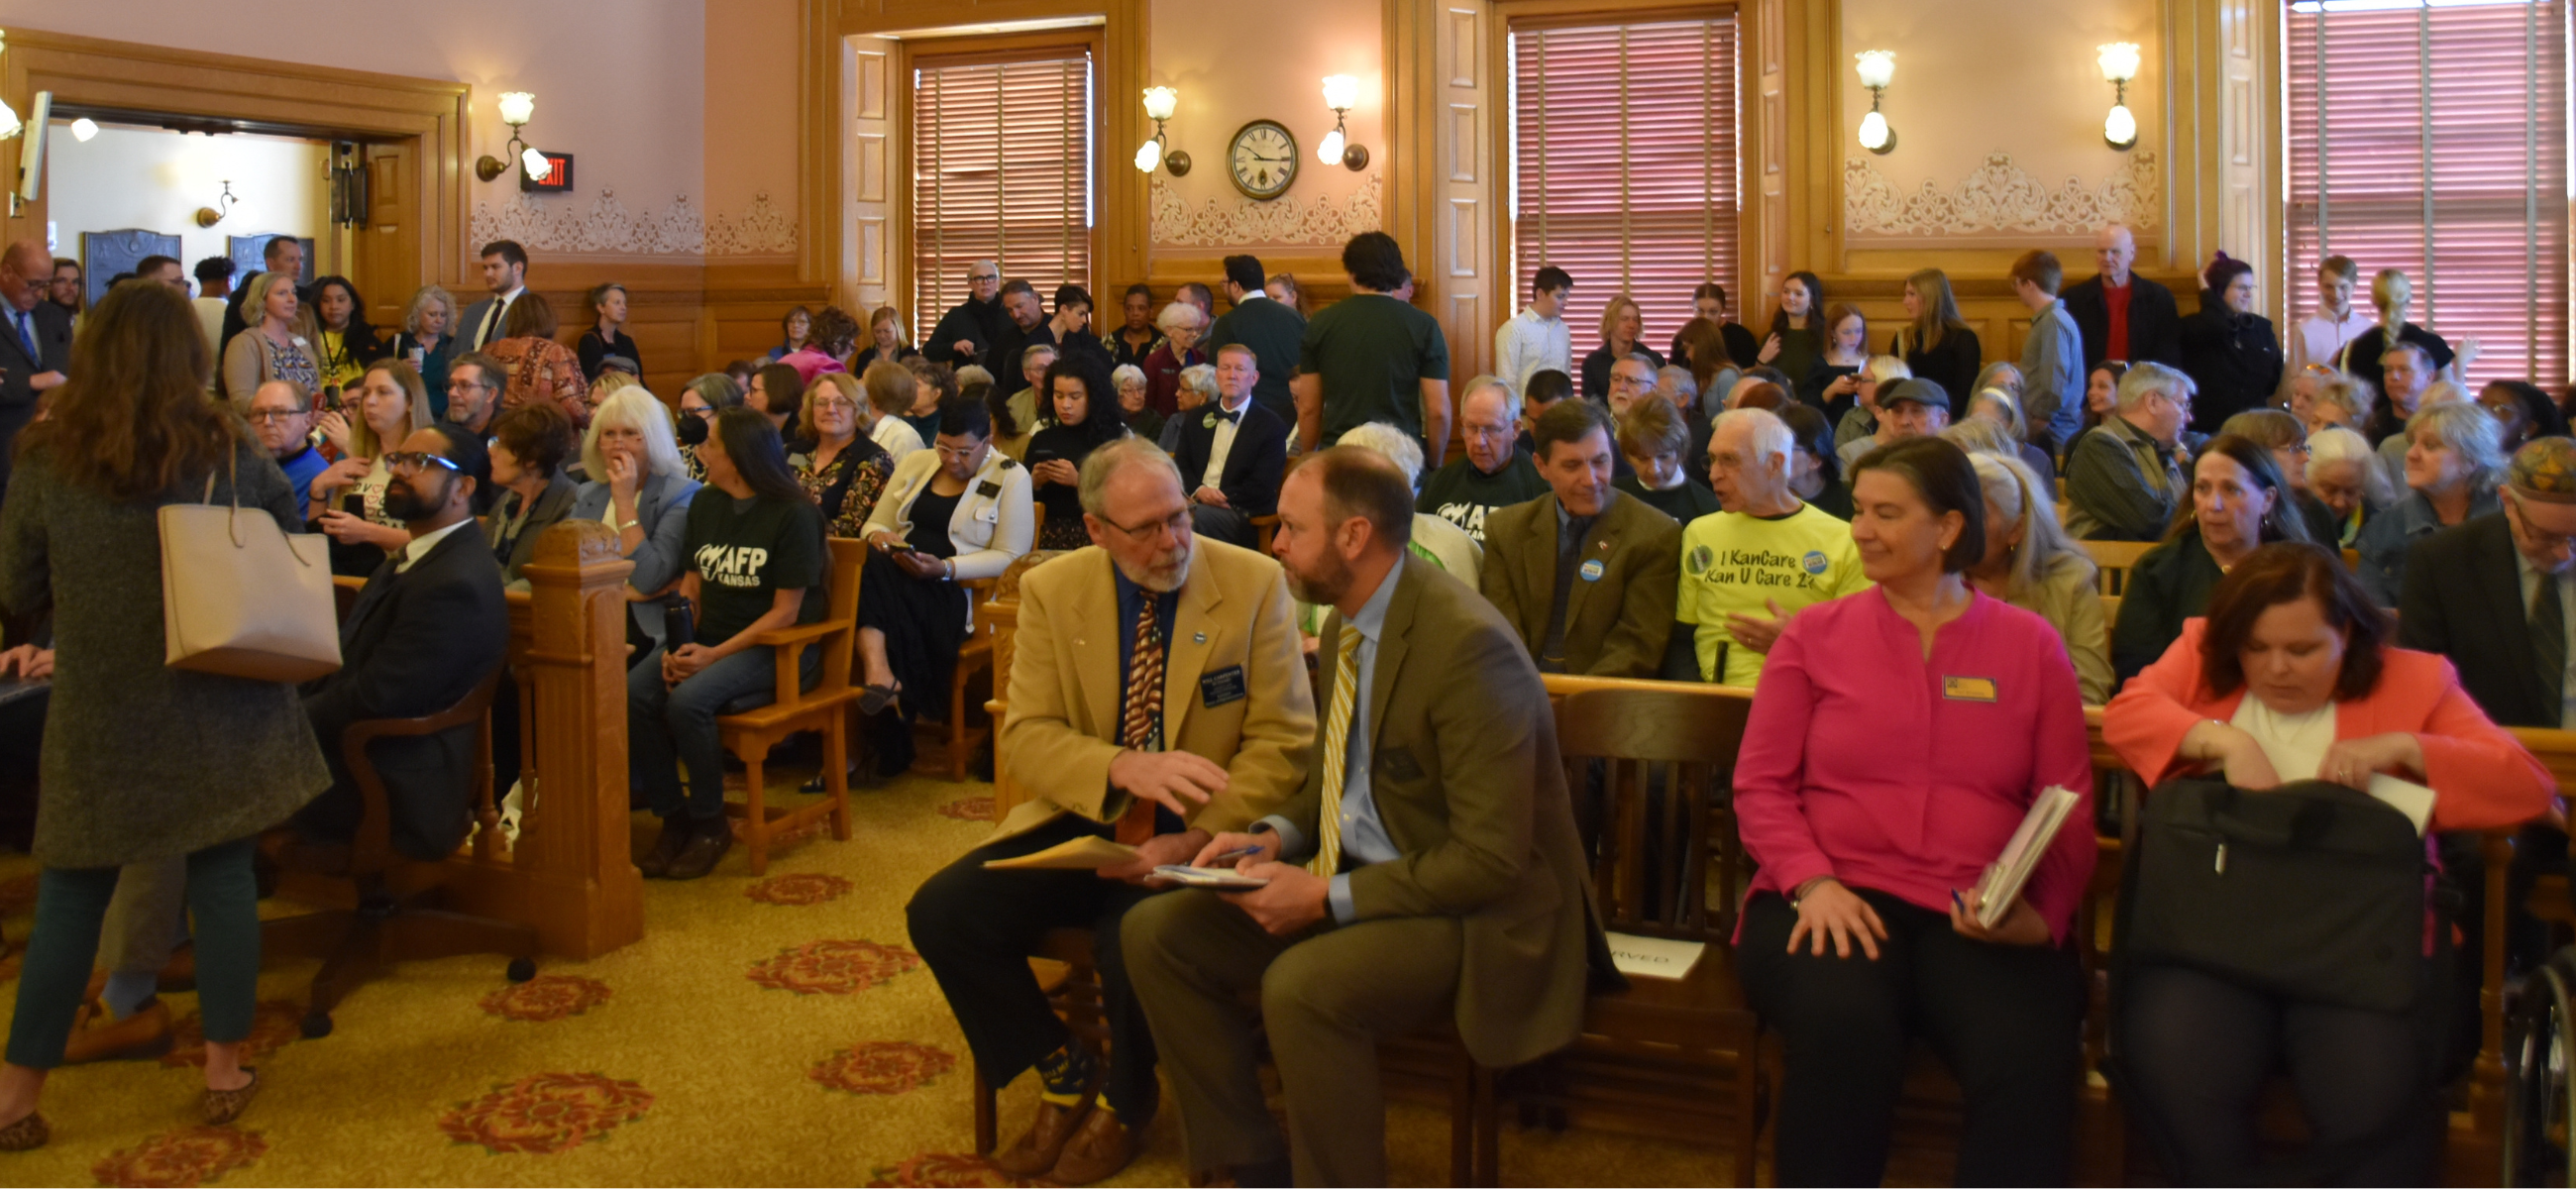 Supporters and opponents of Medicaid expansion packed the old Supreme Court room March 20 for a joint Senate hearing.